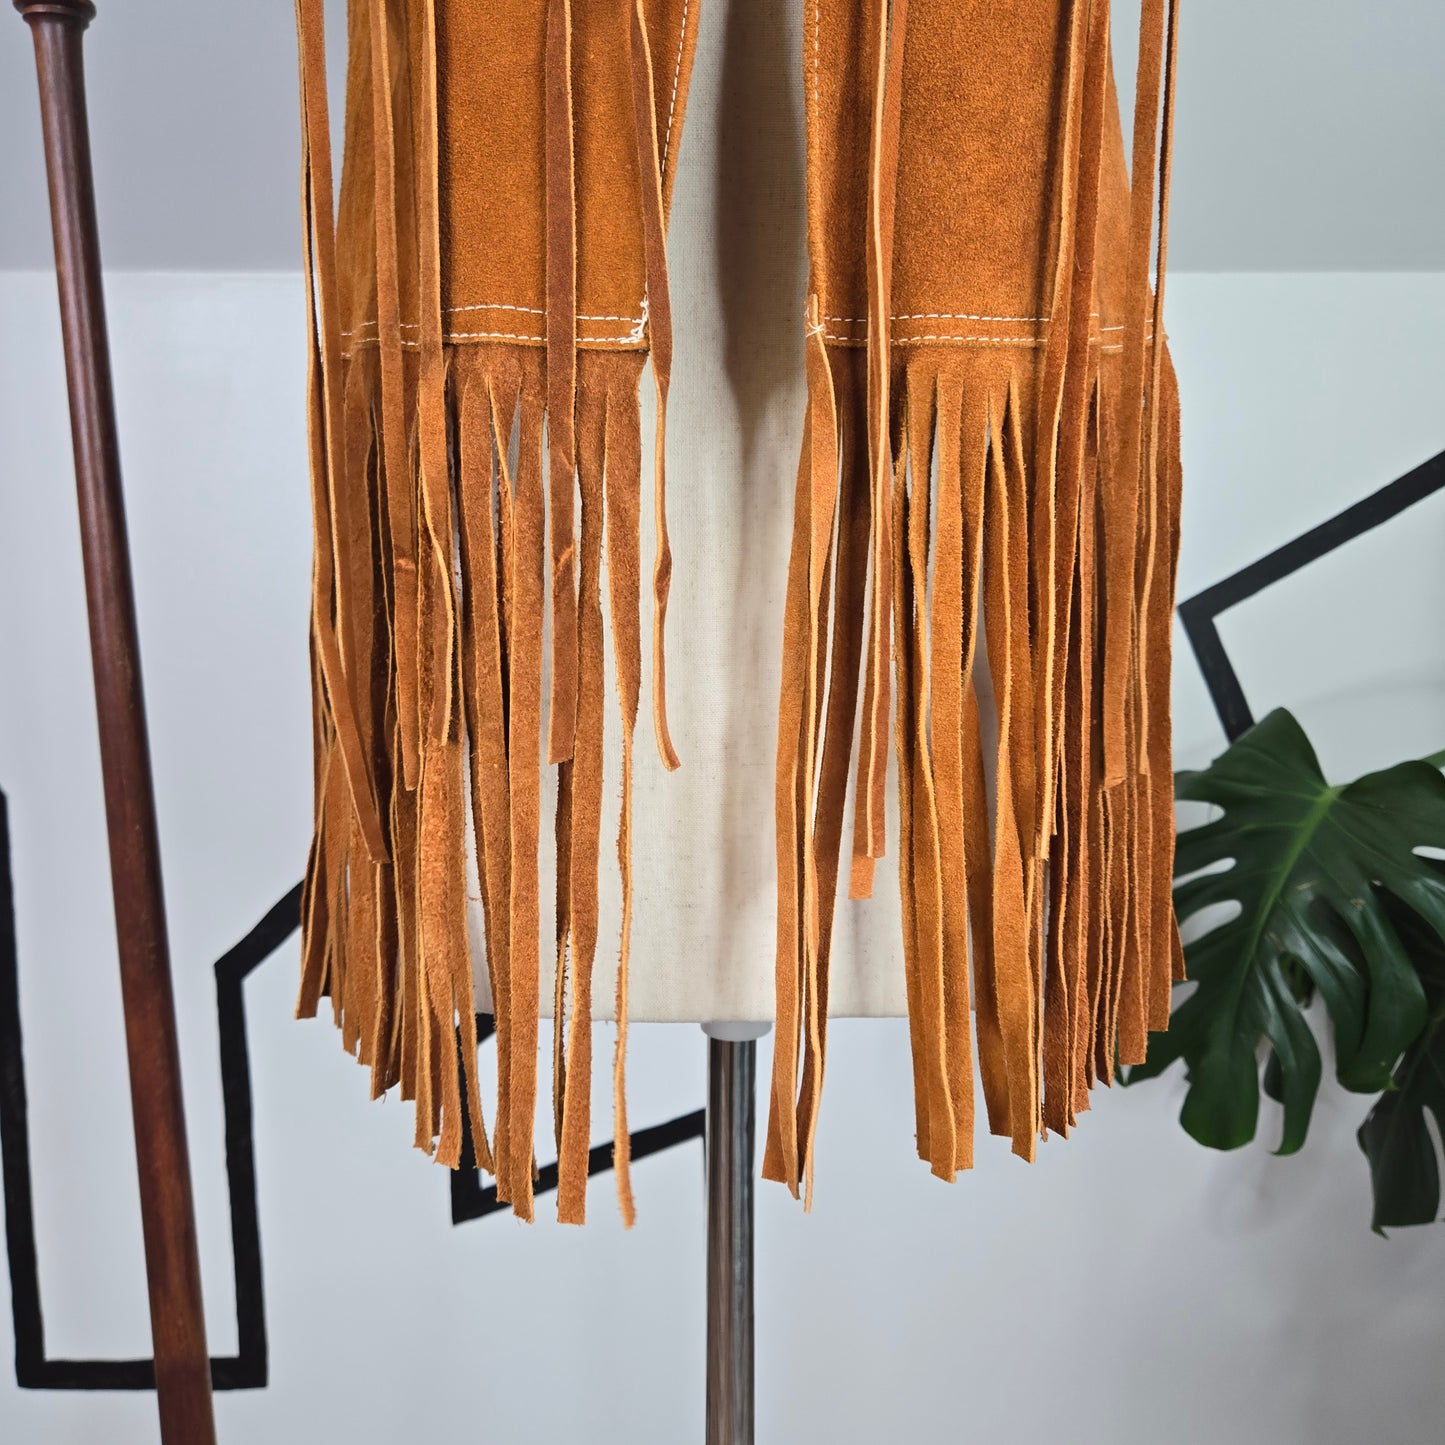 Authentic Genuine Suede Fringe Leather Vest Made in Mexico - size 32